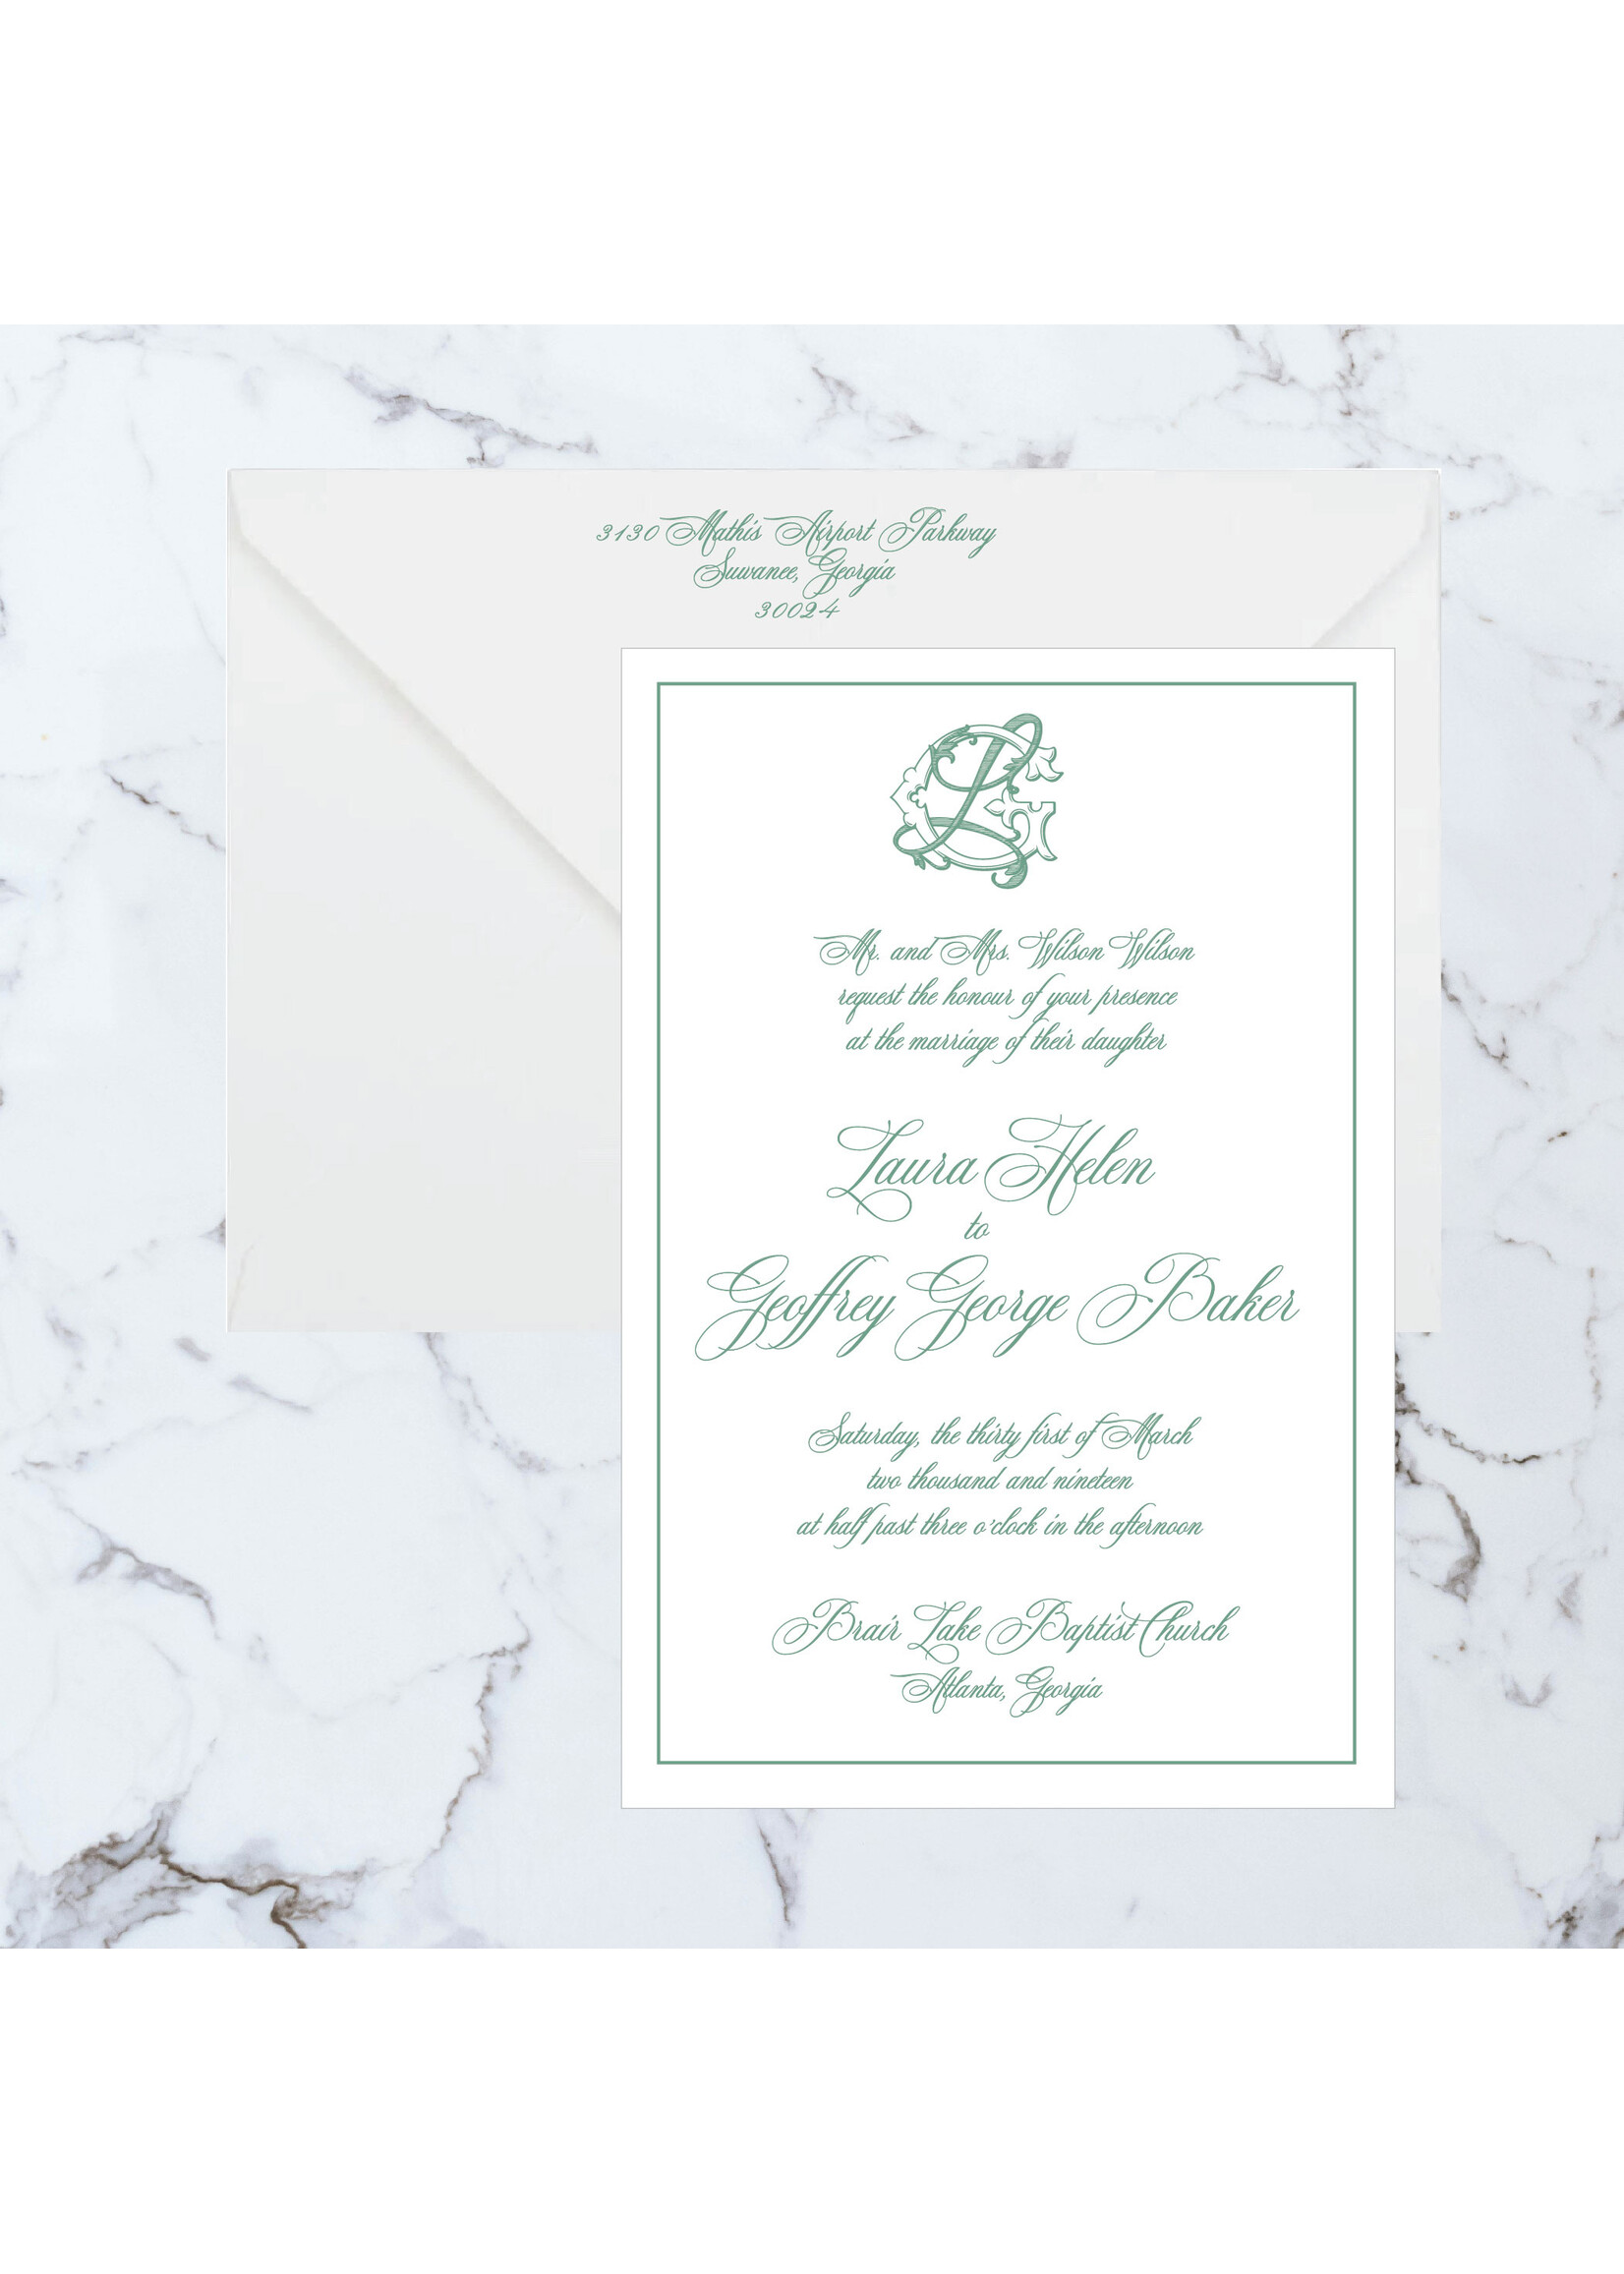 Thermography Invitation 2 Piece Suite